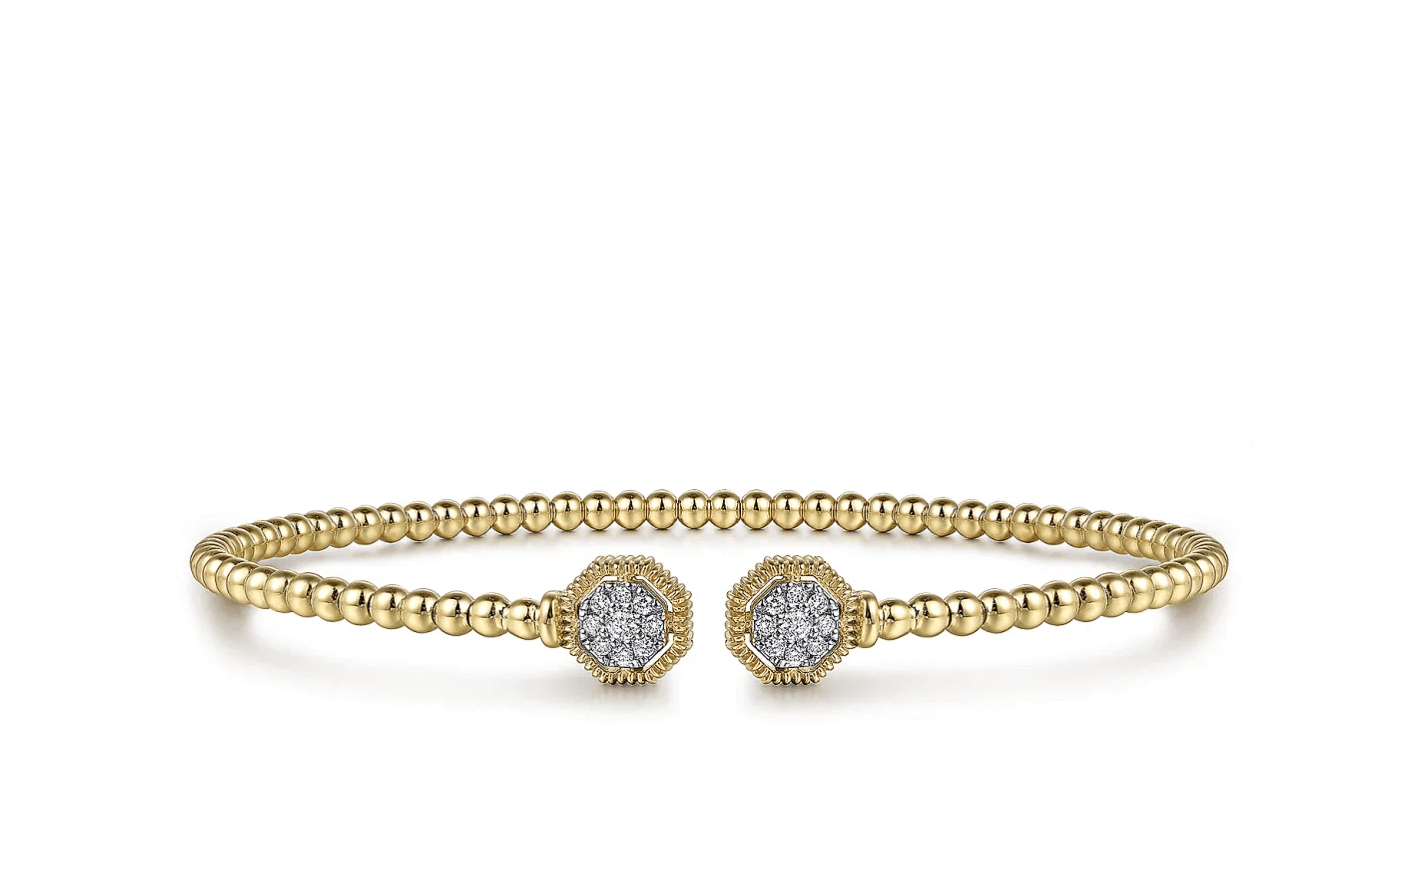 Bracelet diamond flex-cuff bangle diamond clusters at ends 14kt yellow gold - Gaines Jewelers